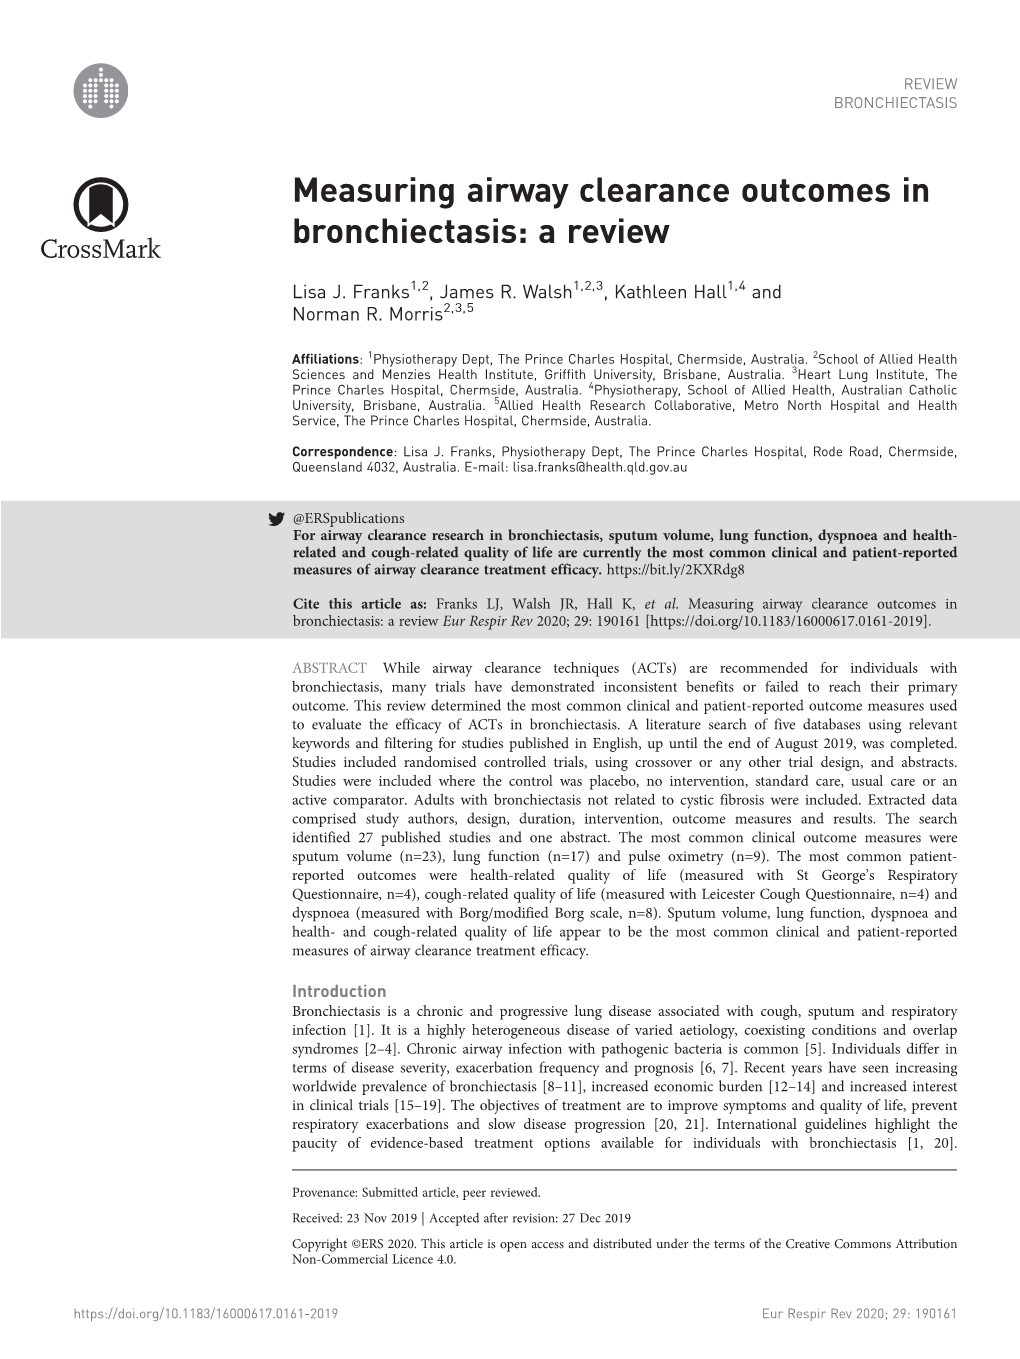 Measuring Airway Clearance Outcomes in Bronchiectasis: a Review